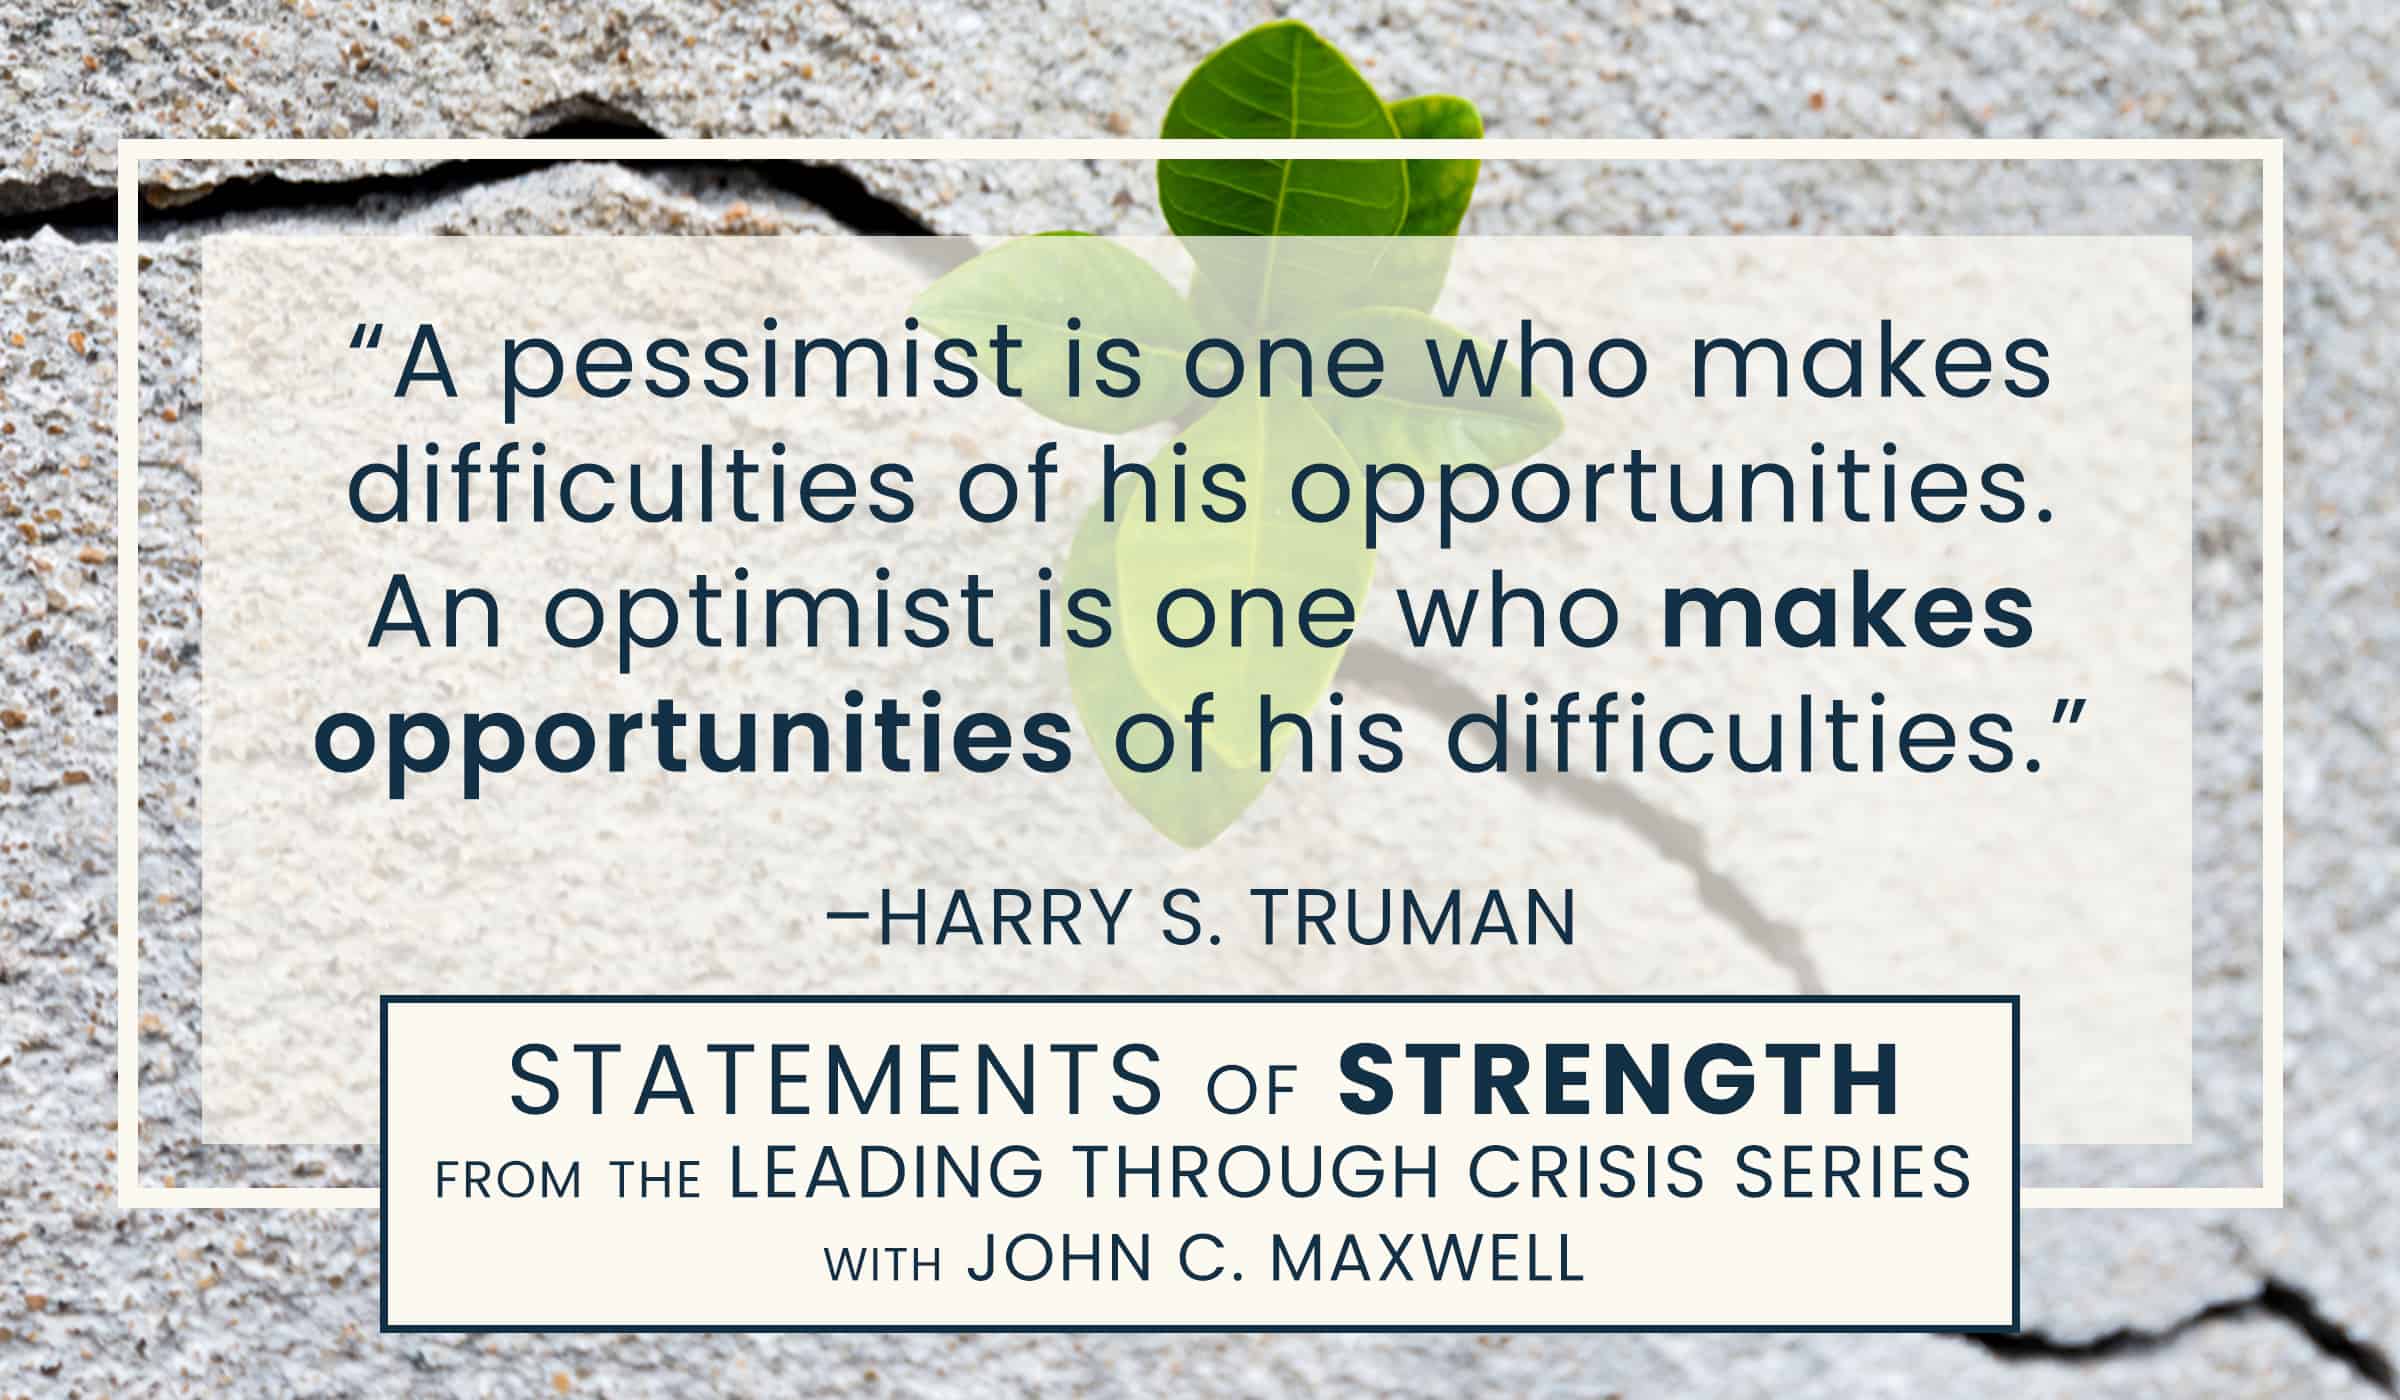 image of quotation text with quote by Harry S Truman